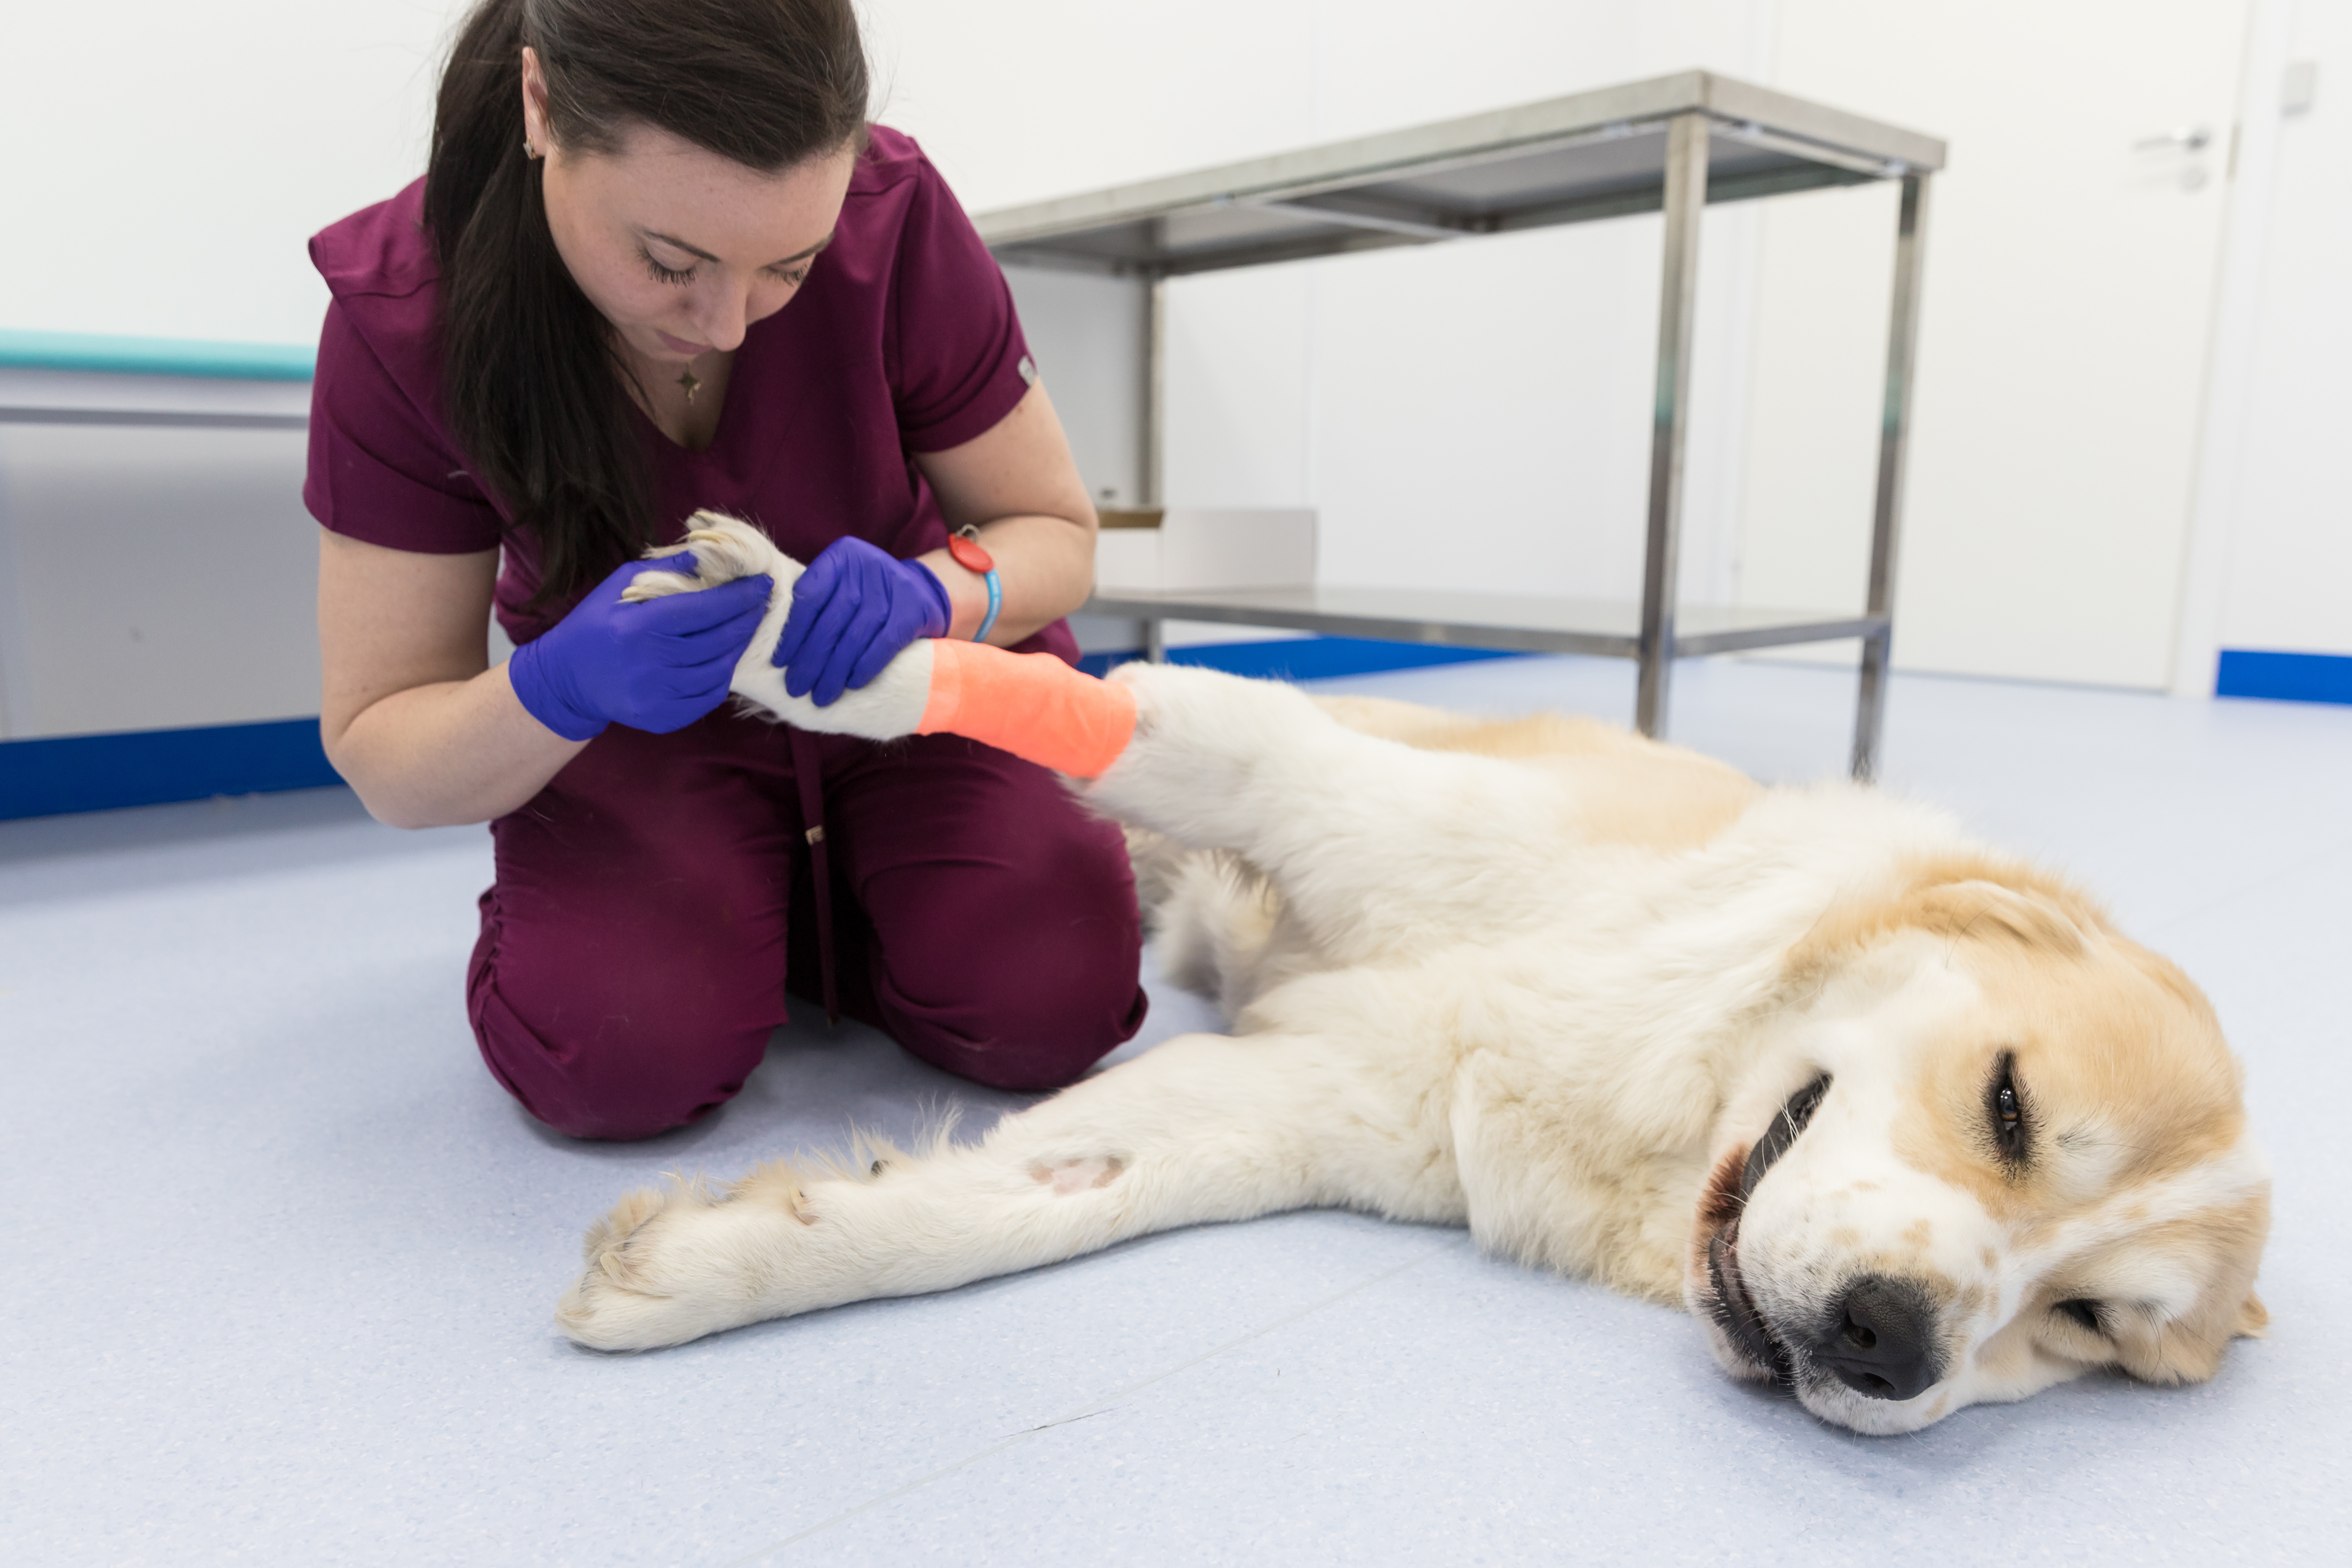 what causes open wounds on dogs